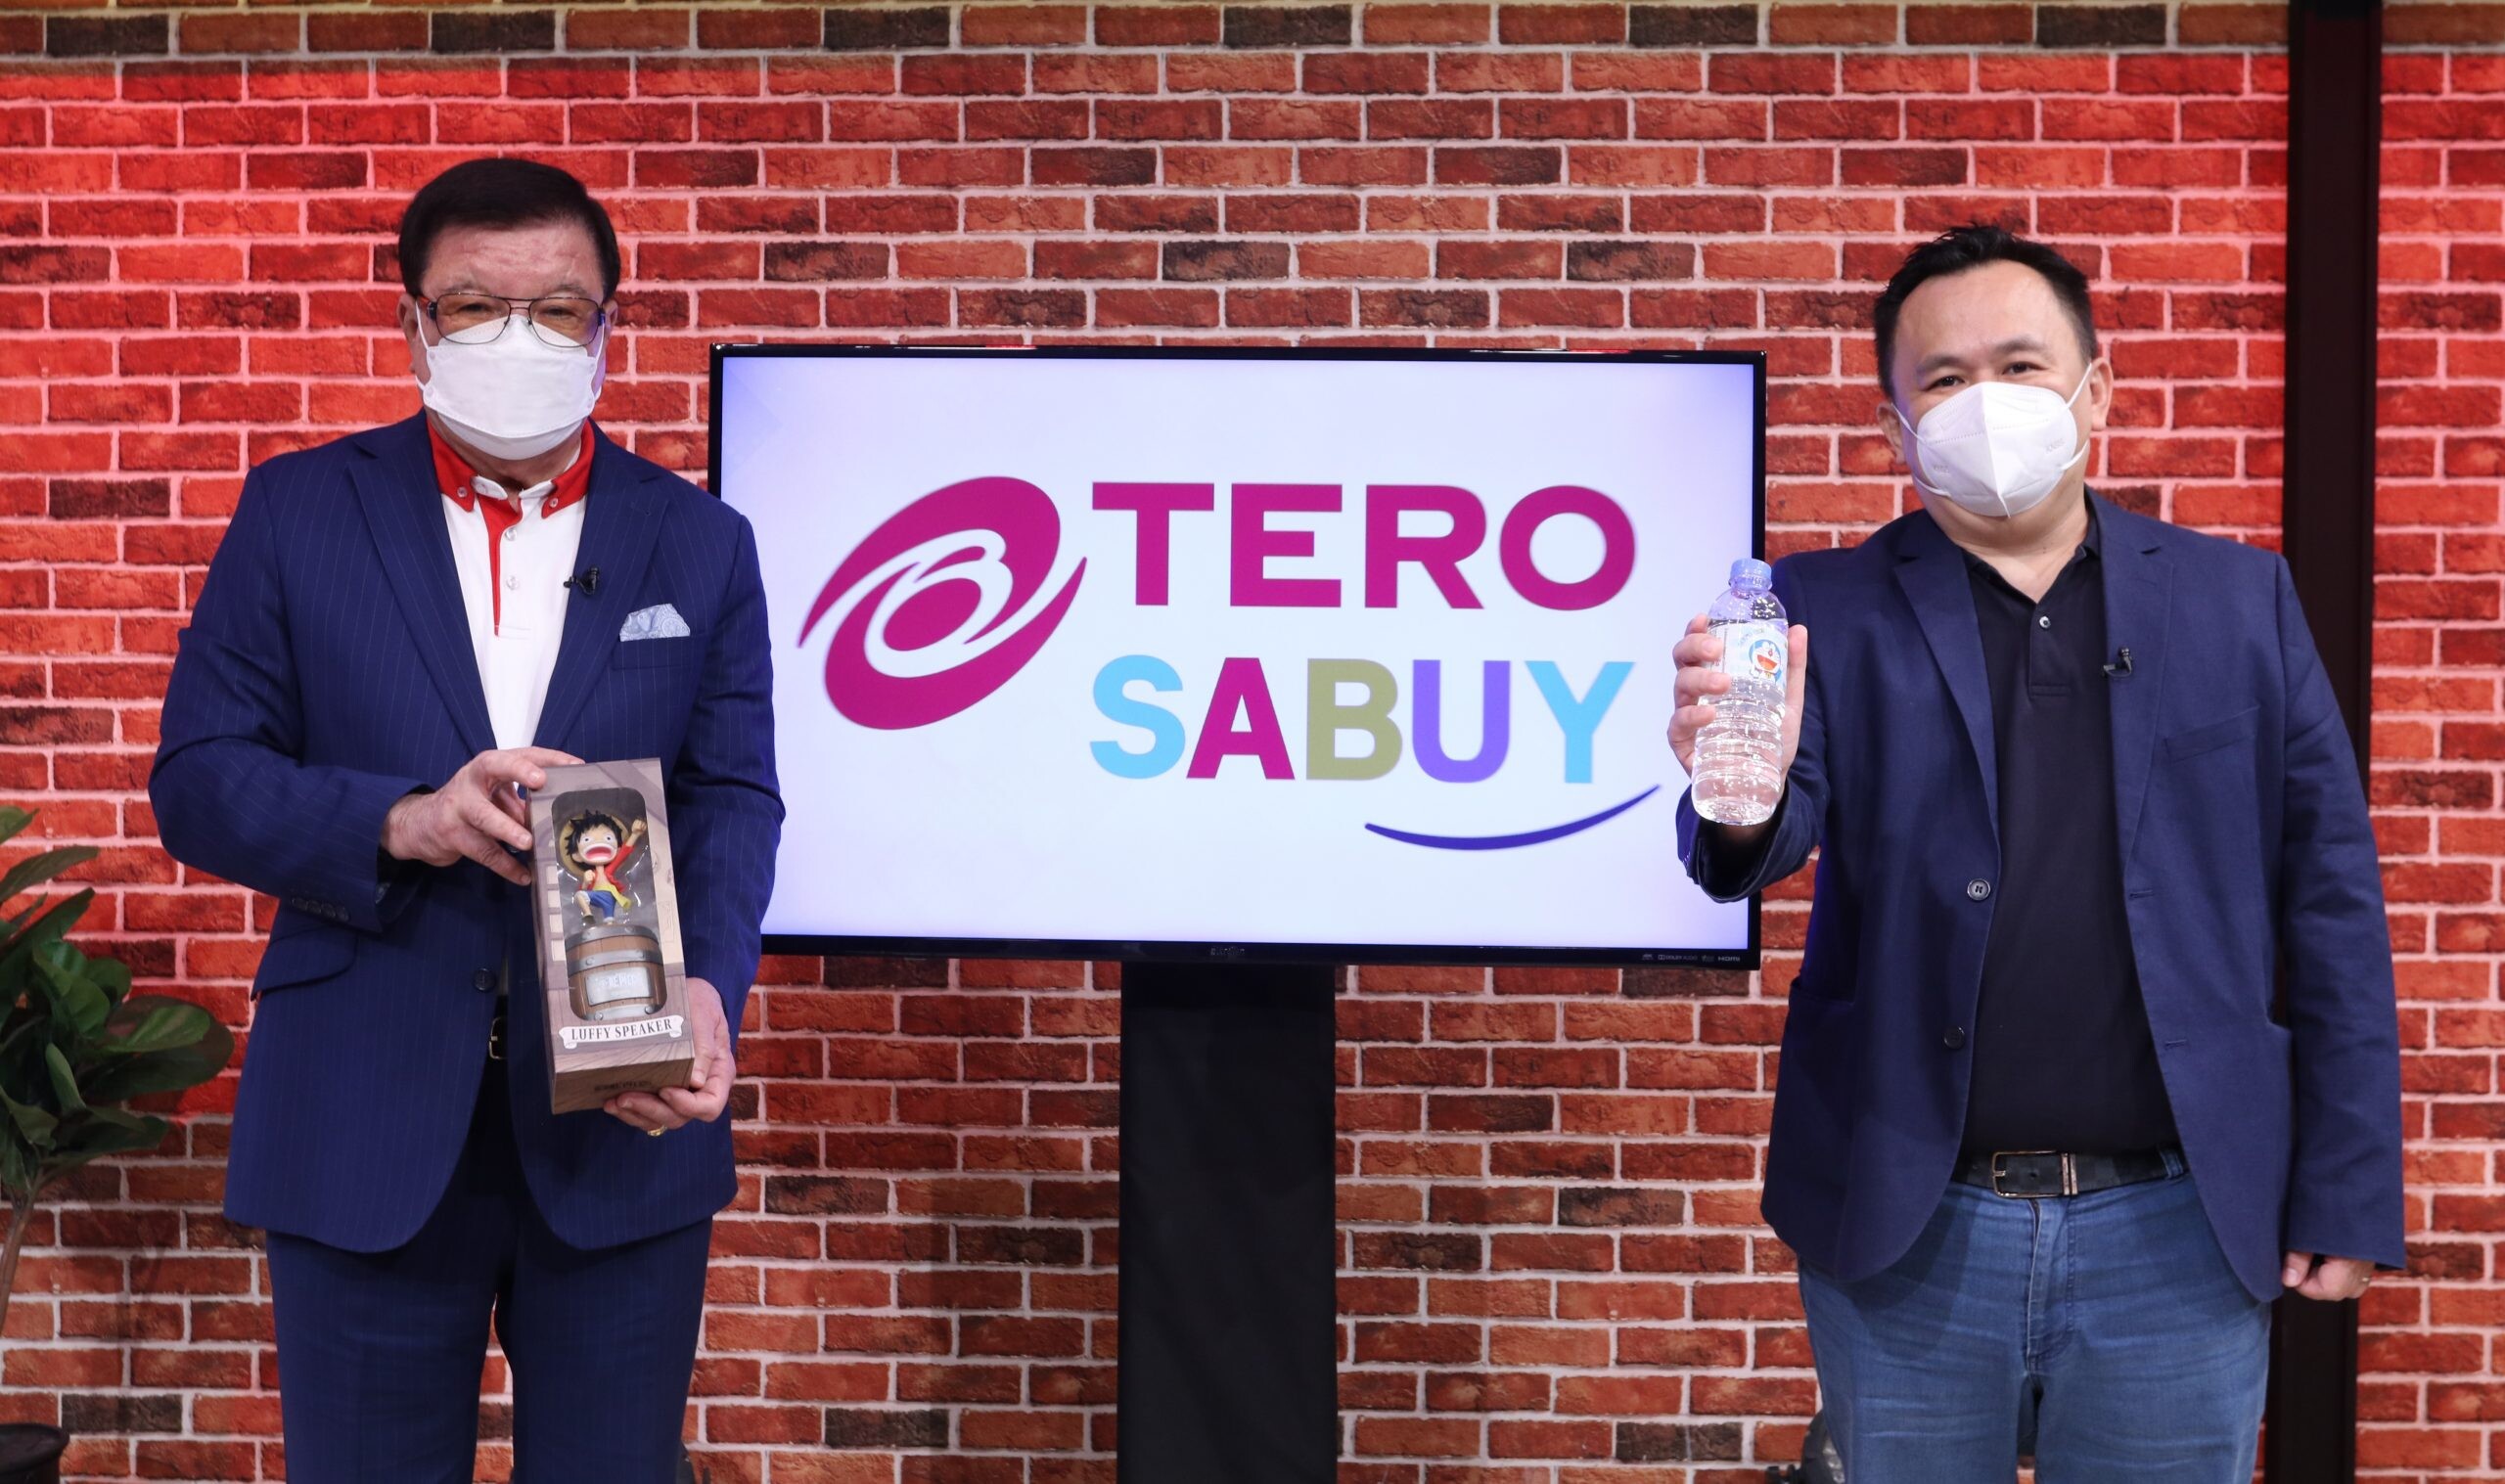 TERO x SABUY Launches a new JV, "TERO SUBUY"  Combining the strengths of media & entertainment with technology